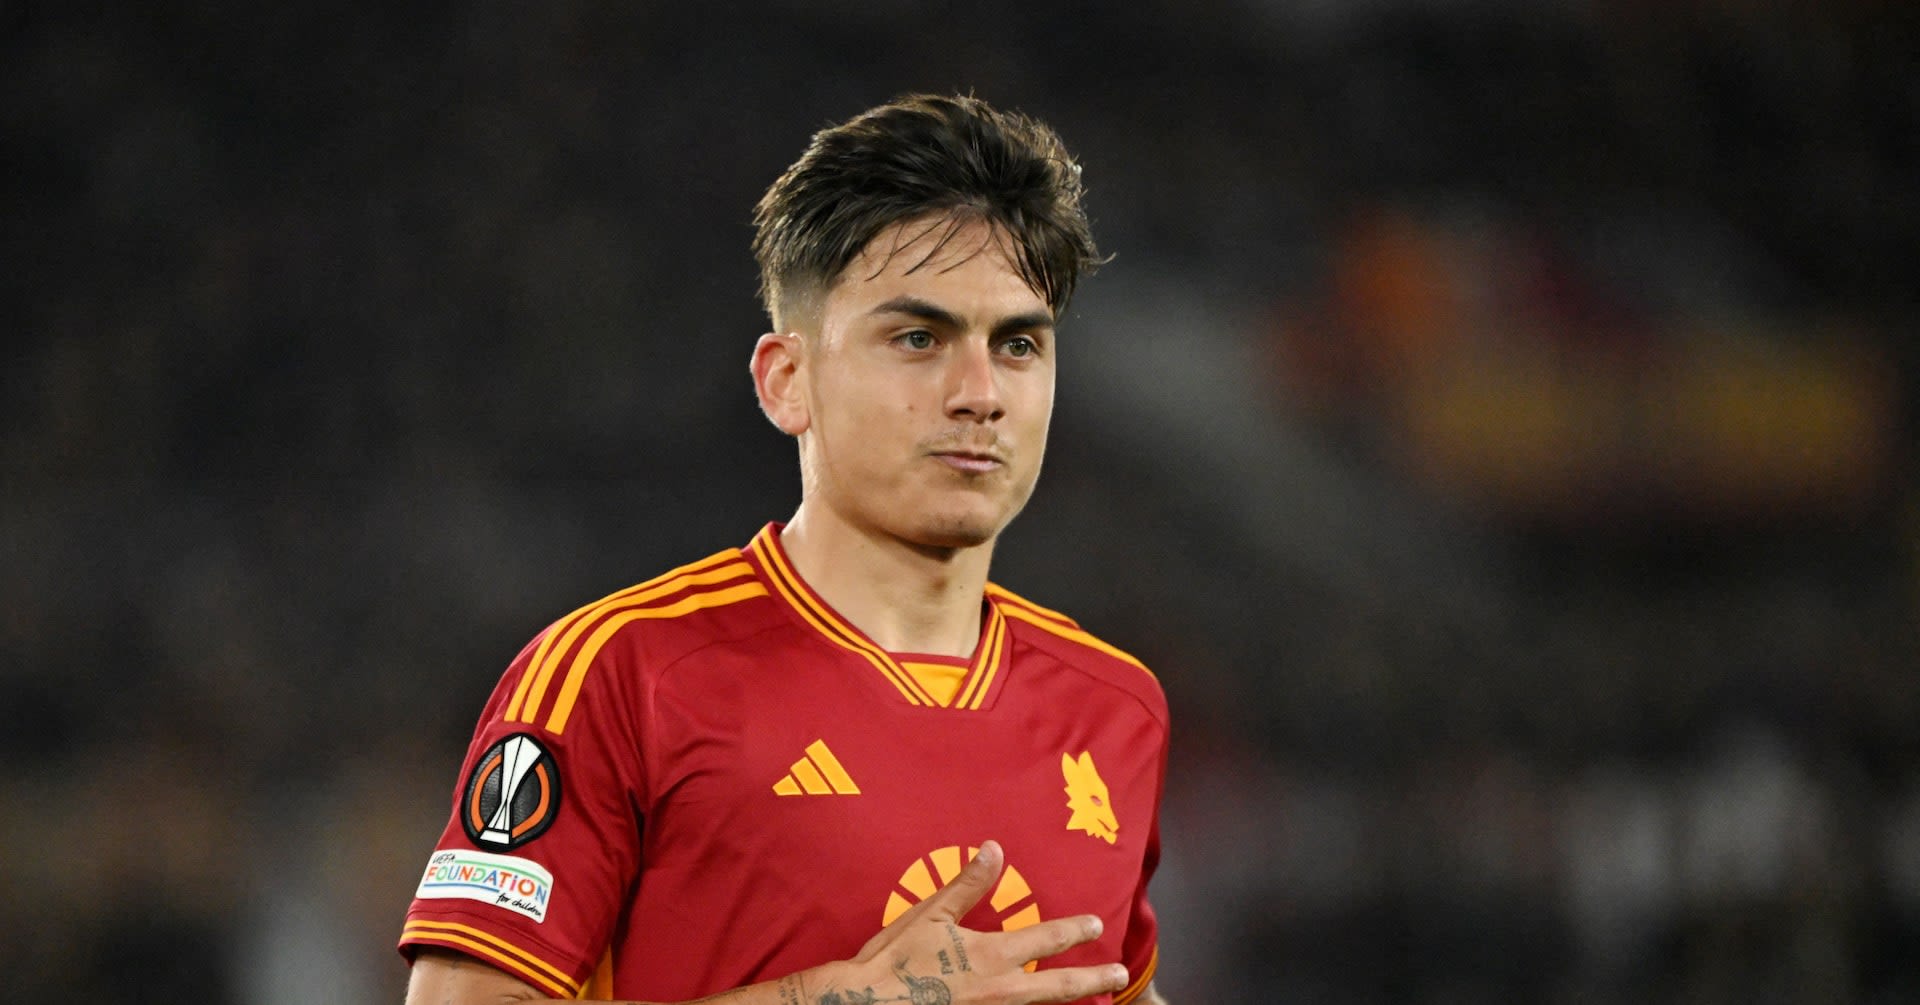 Copa America snub an unexpected blow, says Argentina's Dybala